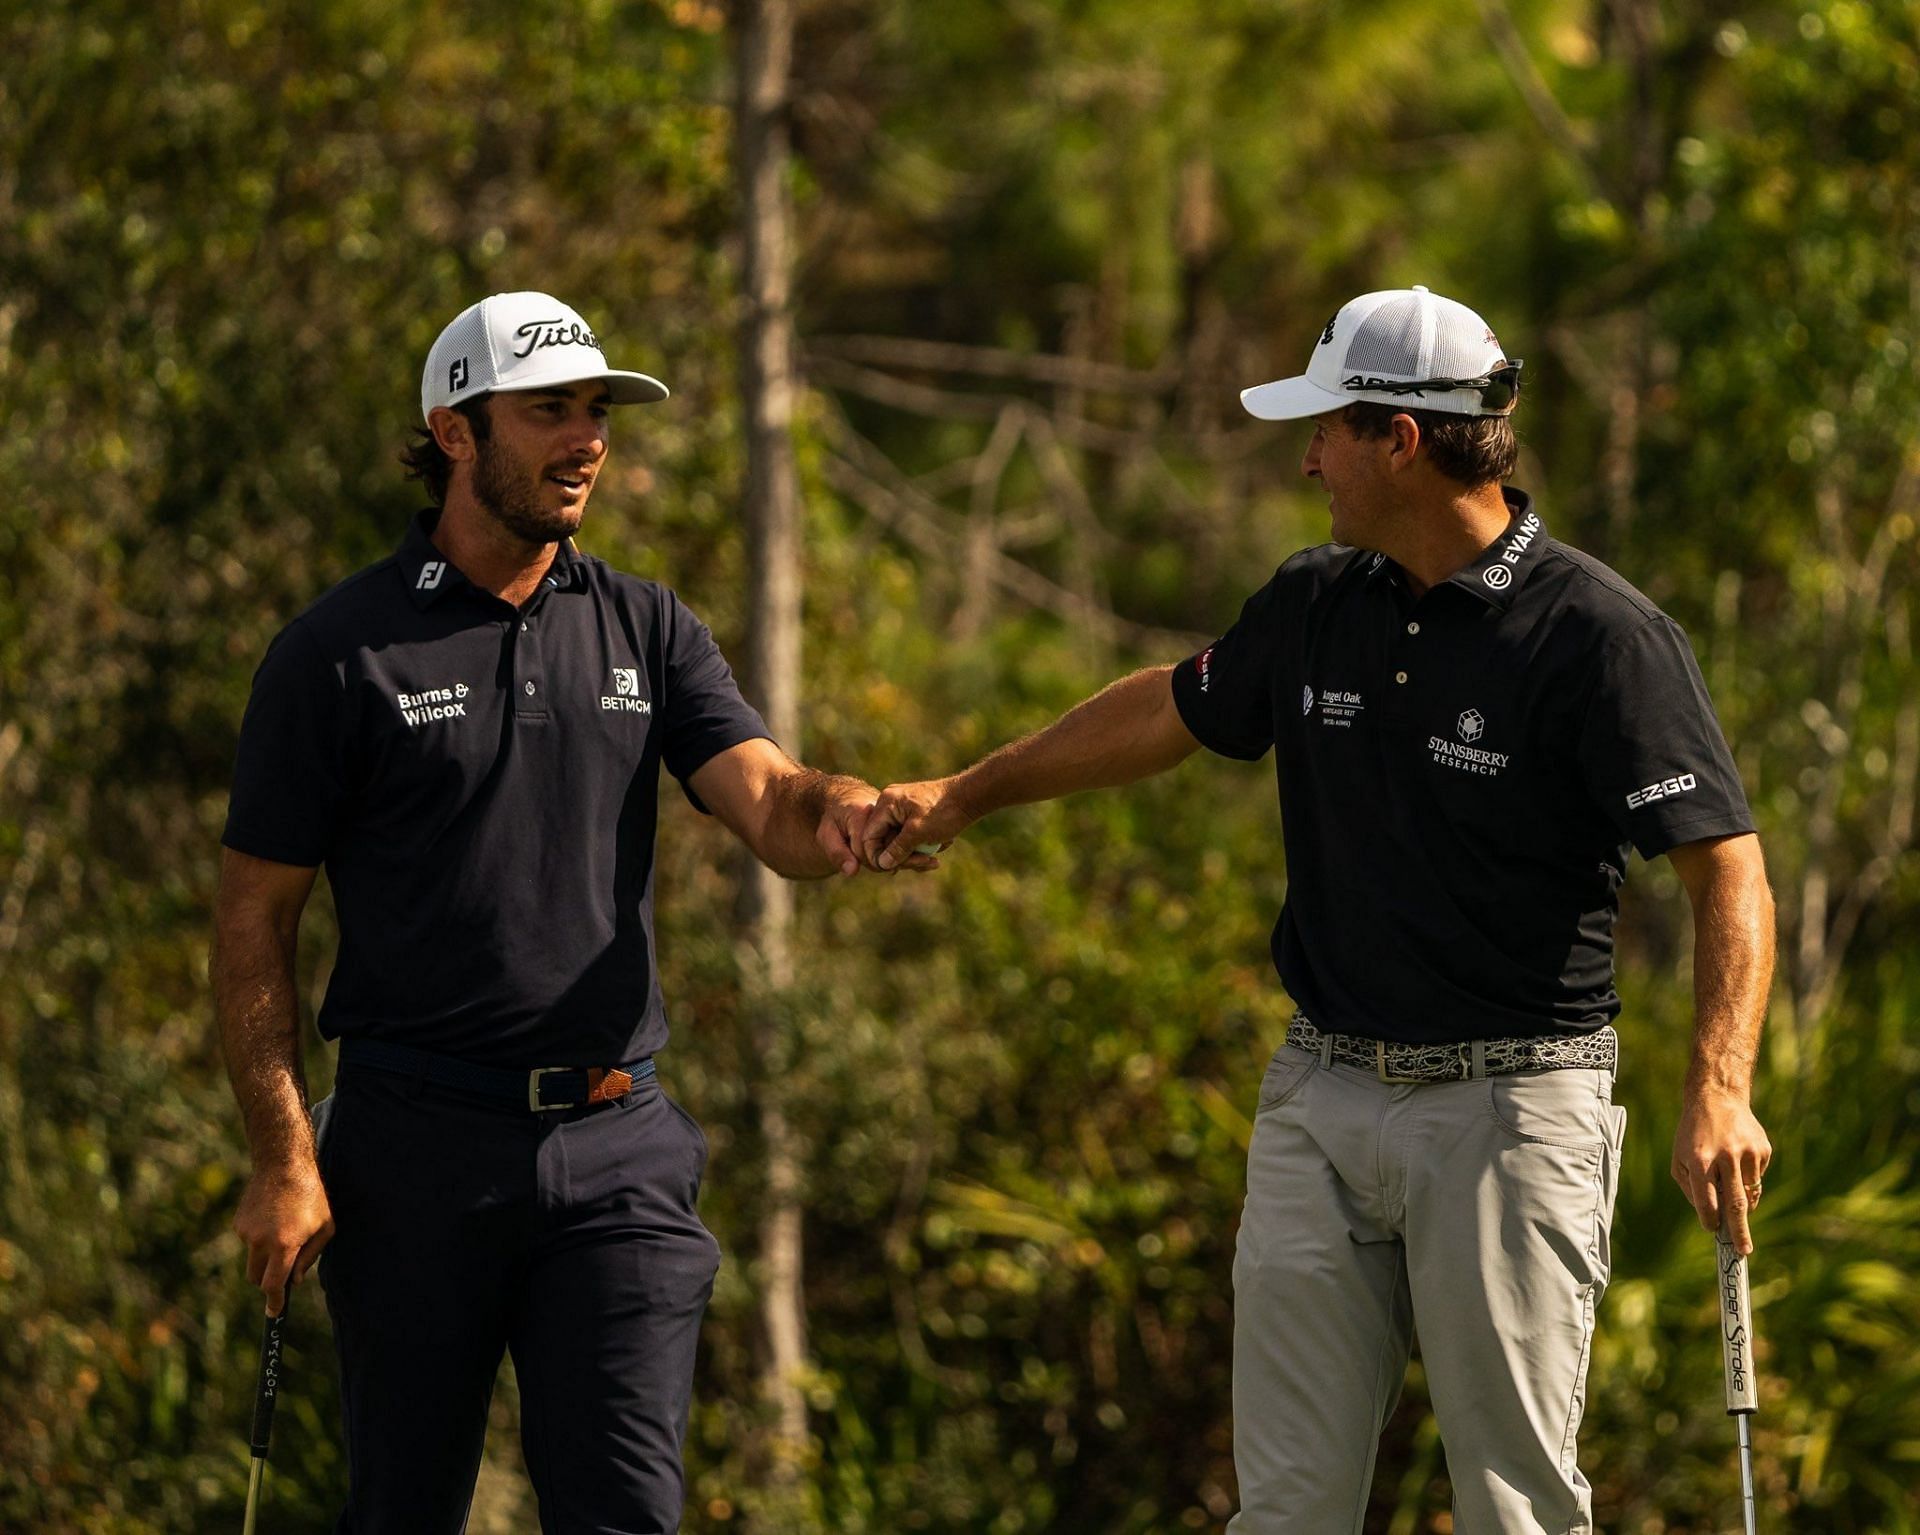 Homa will be seen teaming up with Kevin Kisner in the upcoming QBE Shootout (Image via QBE Shootout)